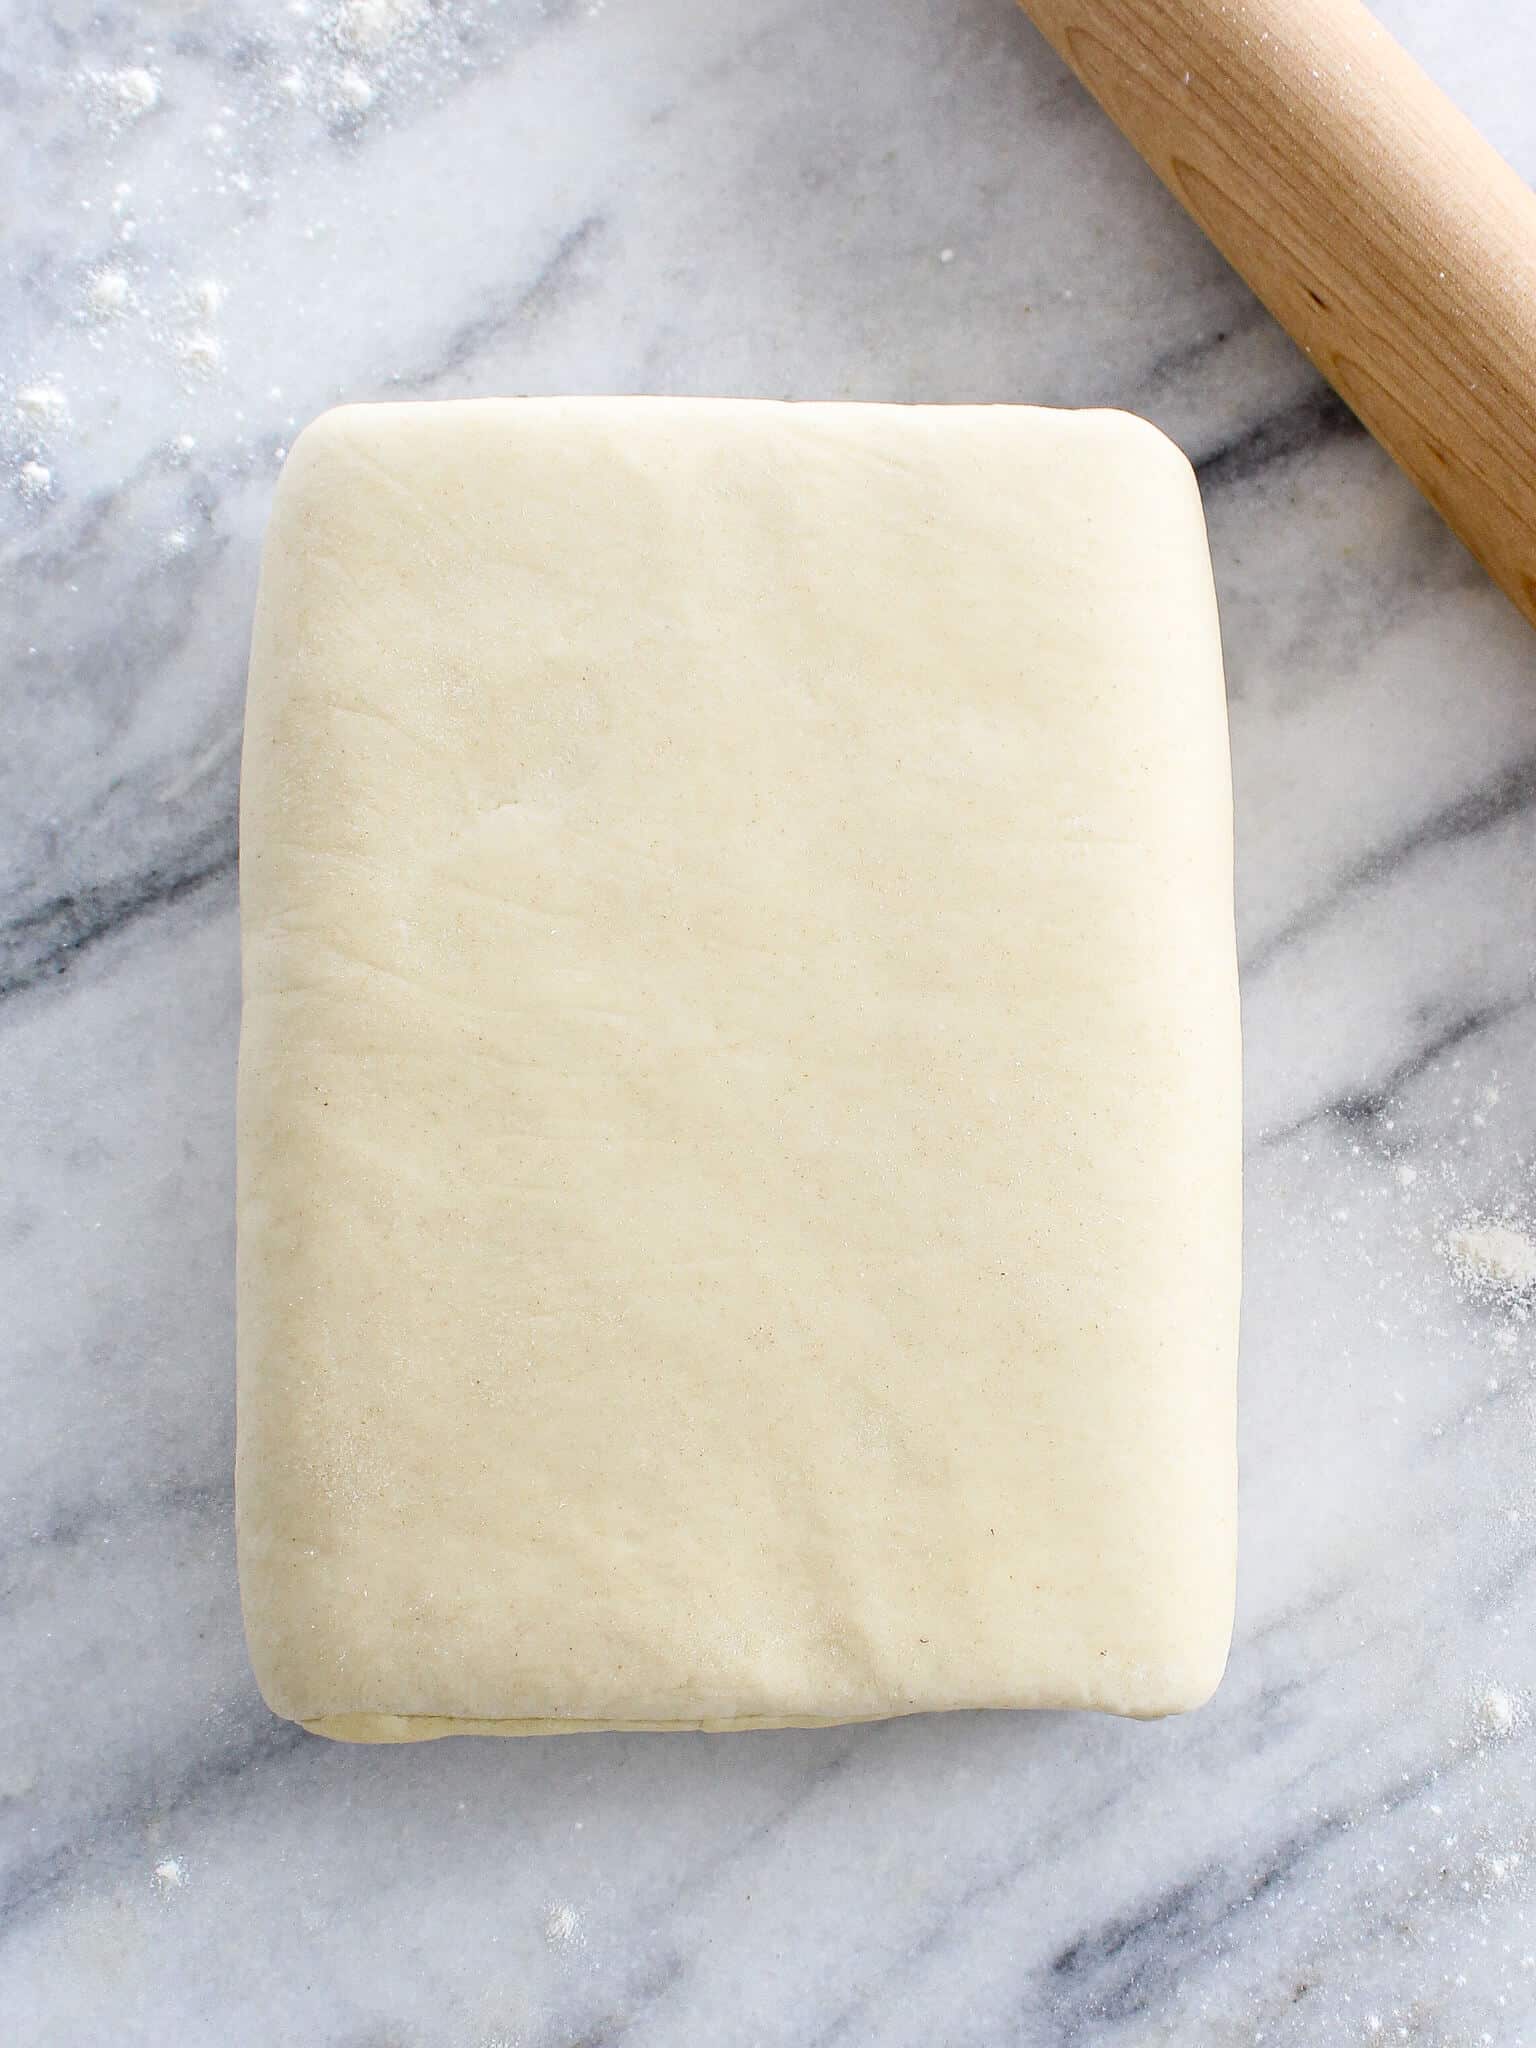 Inverse Puff Pastry wooden rolling pin